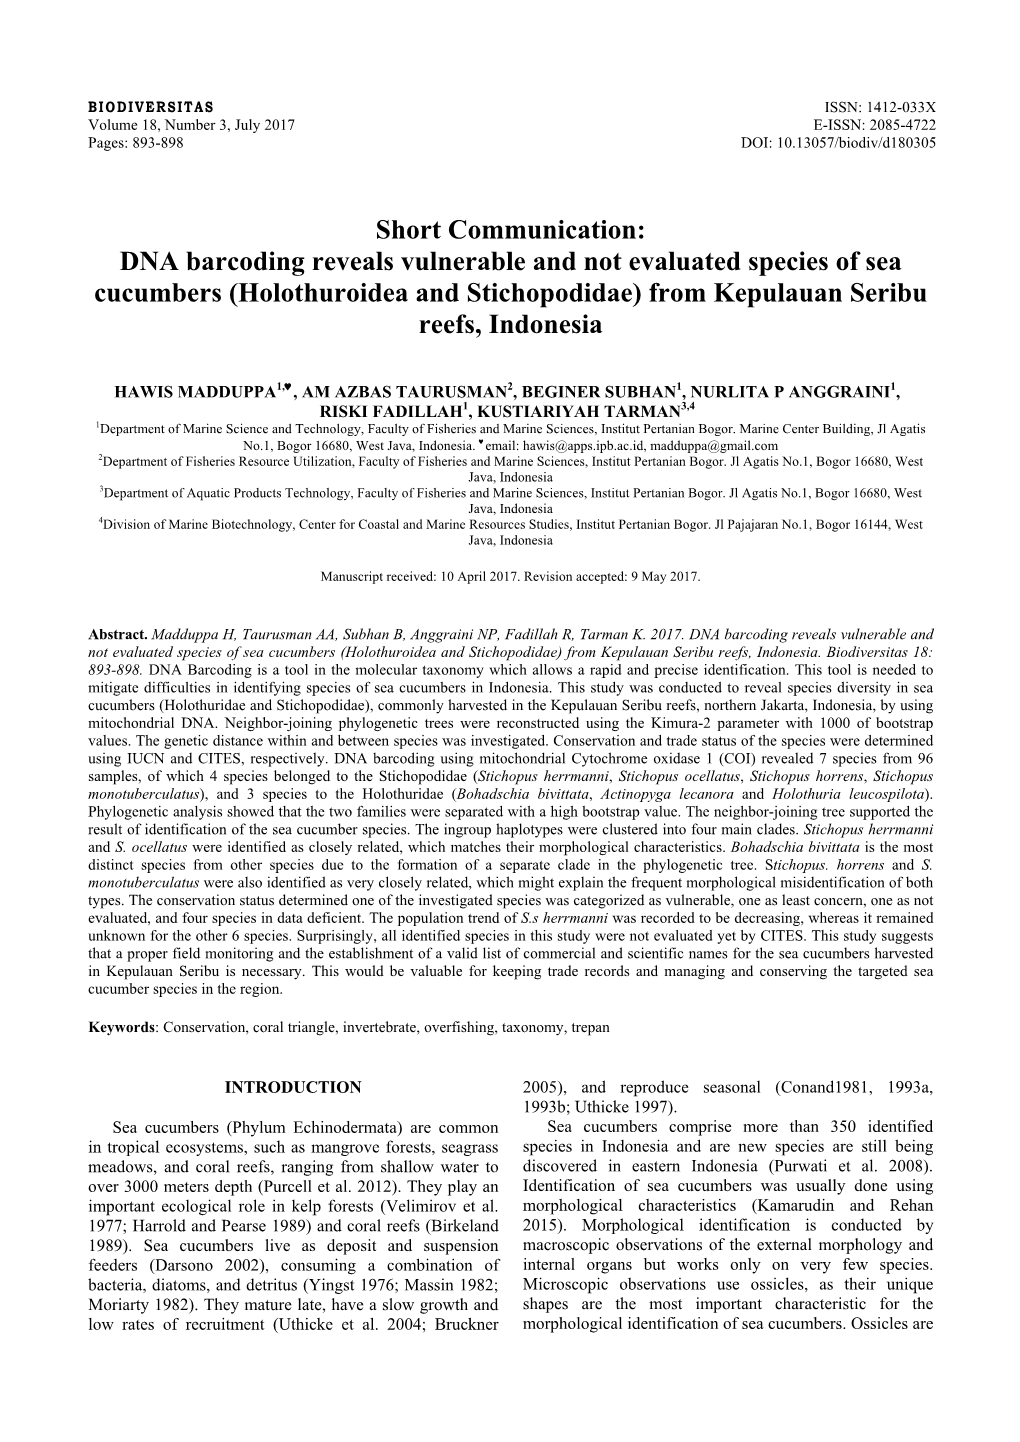 DNA Barcoding Reveals Vulnerable and Not Evaluated Species of Sea Cucumbers (Holothuroidea and Stichopodidae) from Kepulauan Seribu Reefs, Indonesia